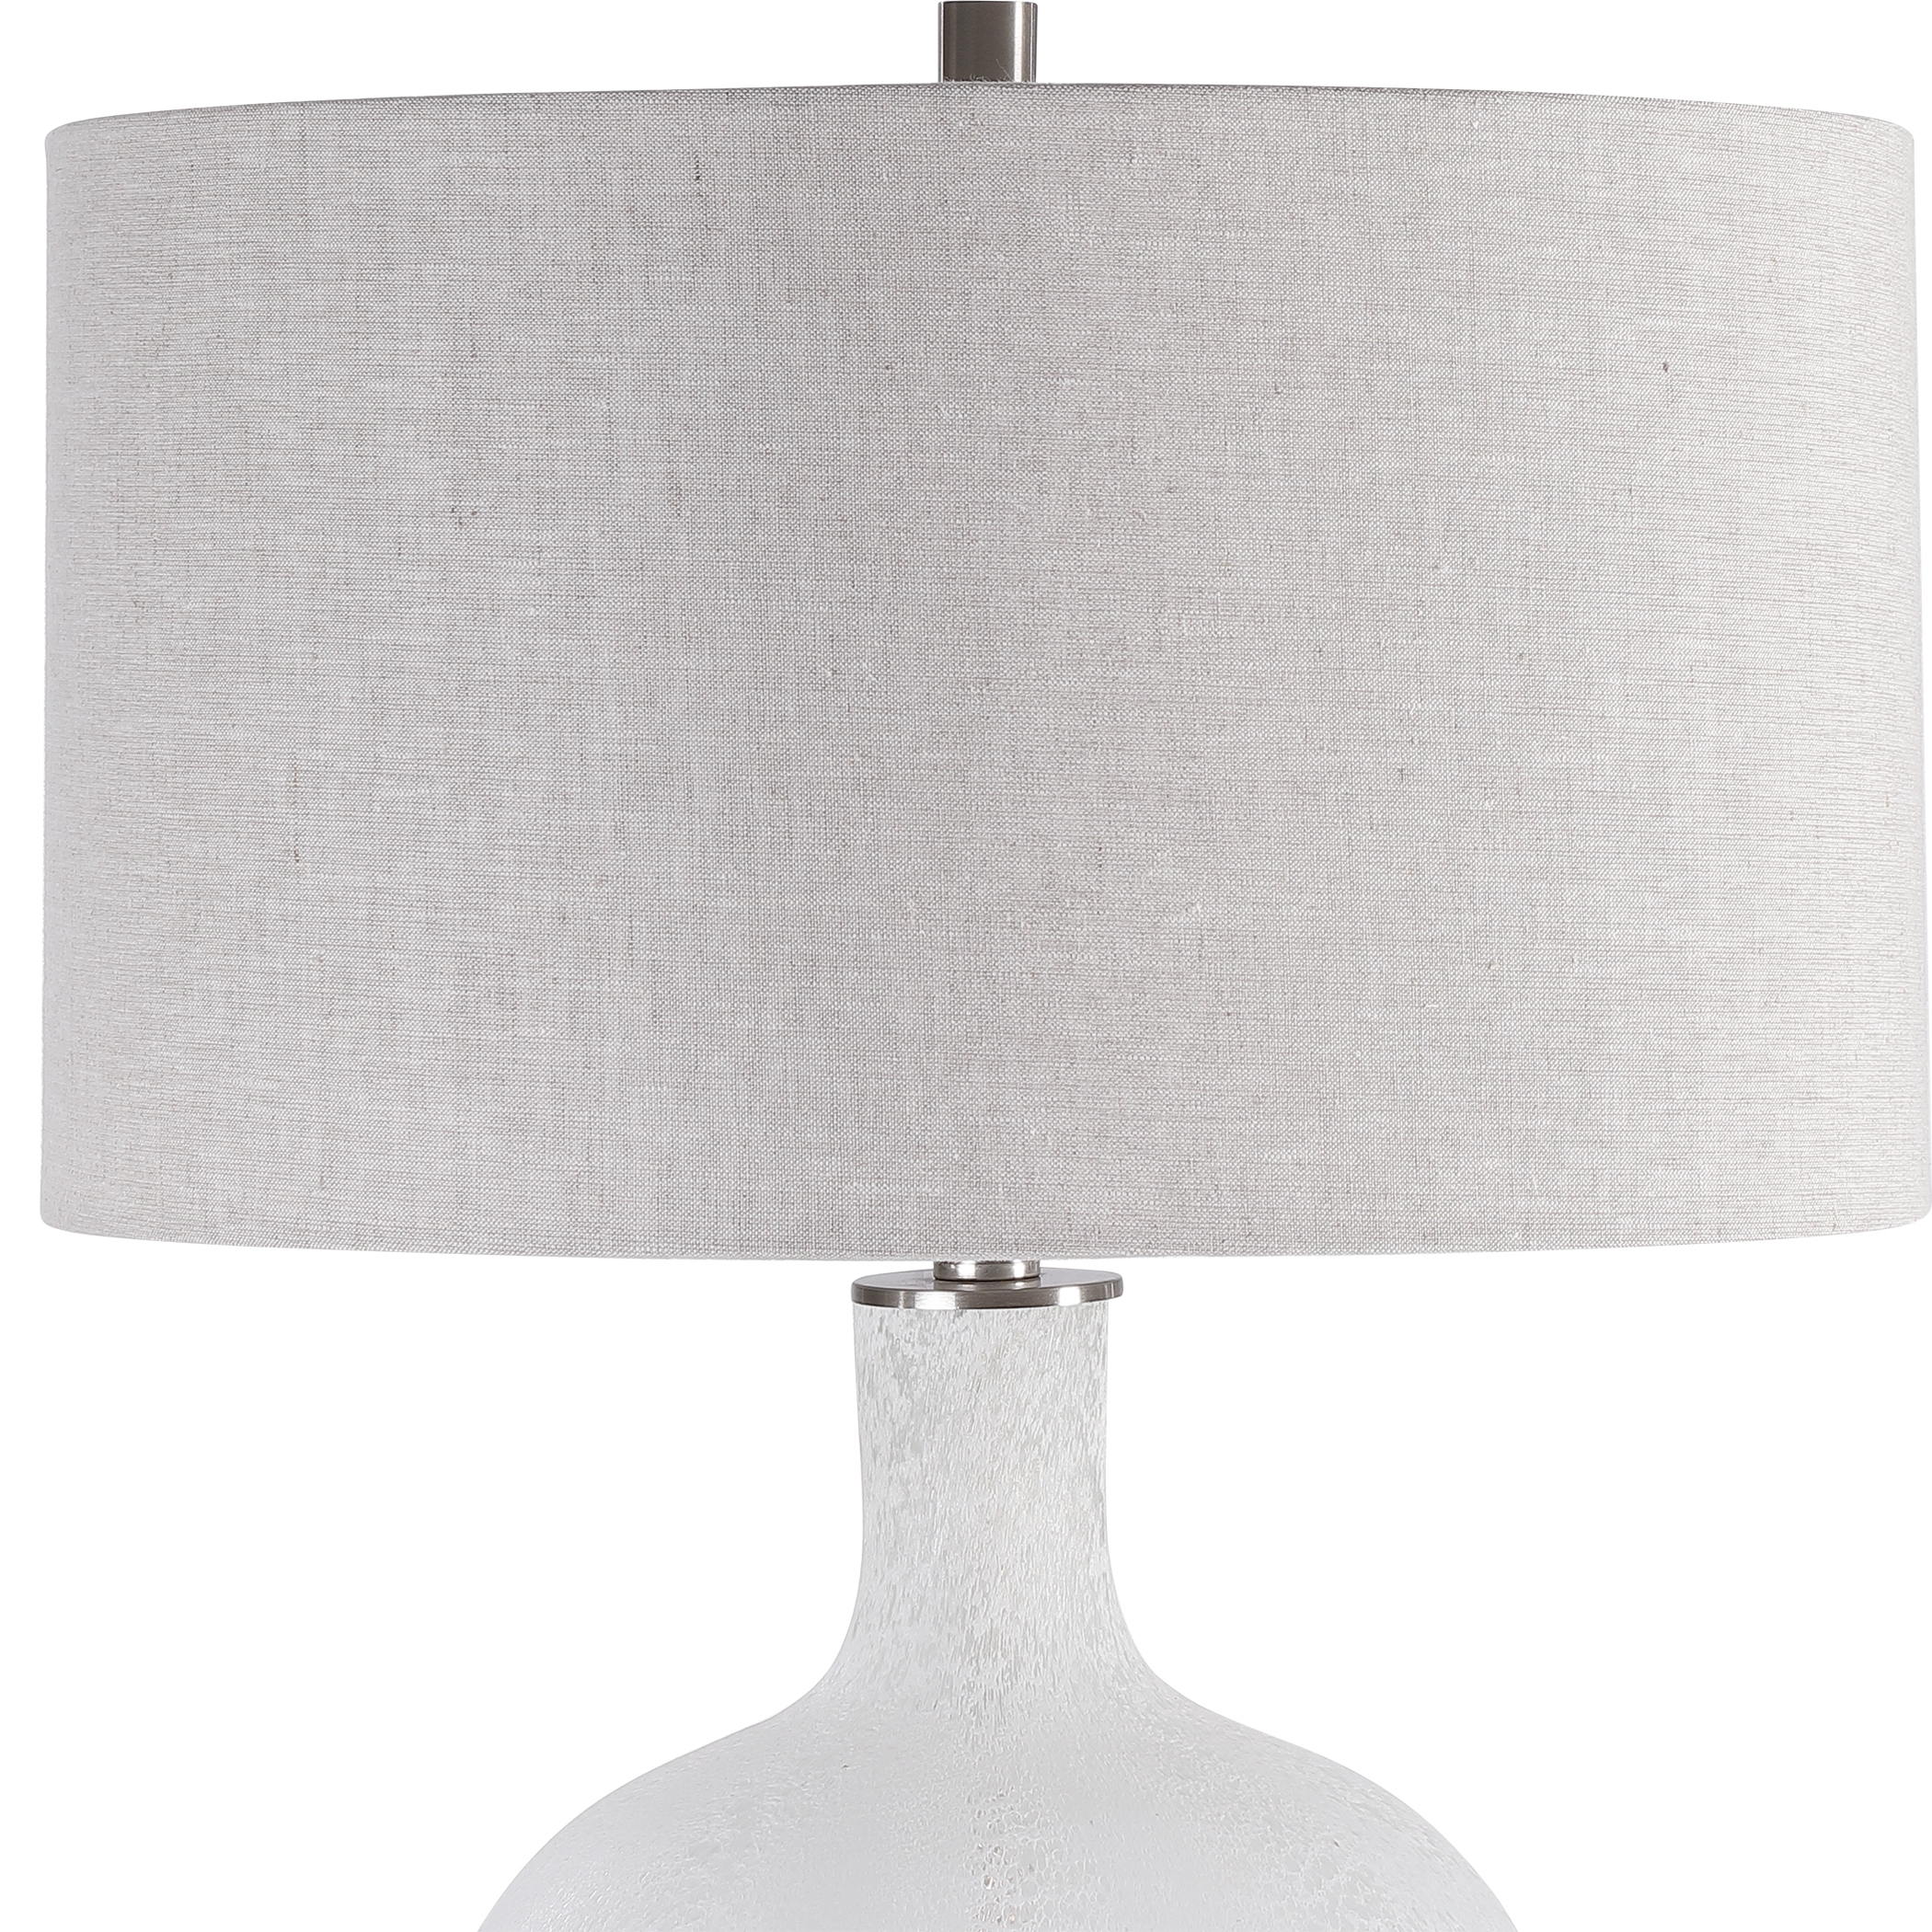 Whiteout Mottled Glass Table Lamp - Image 3